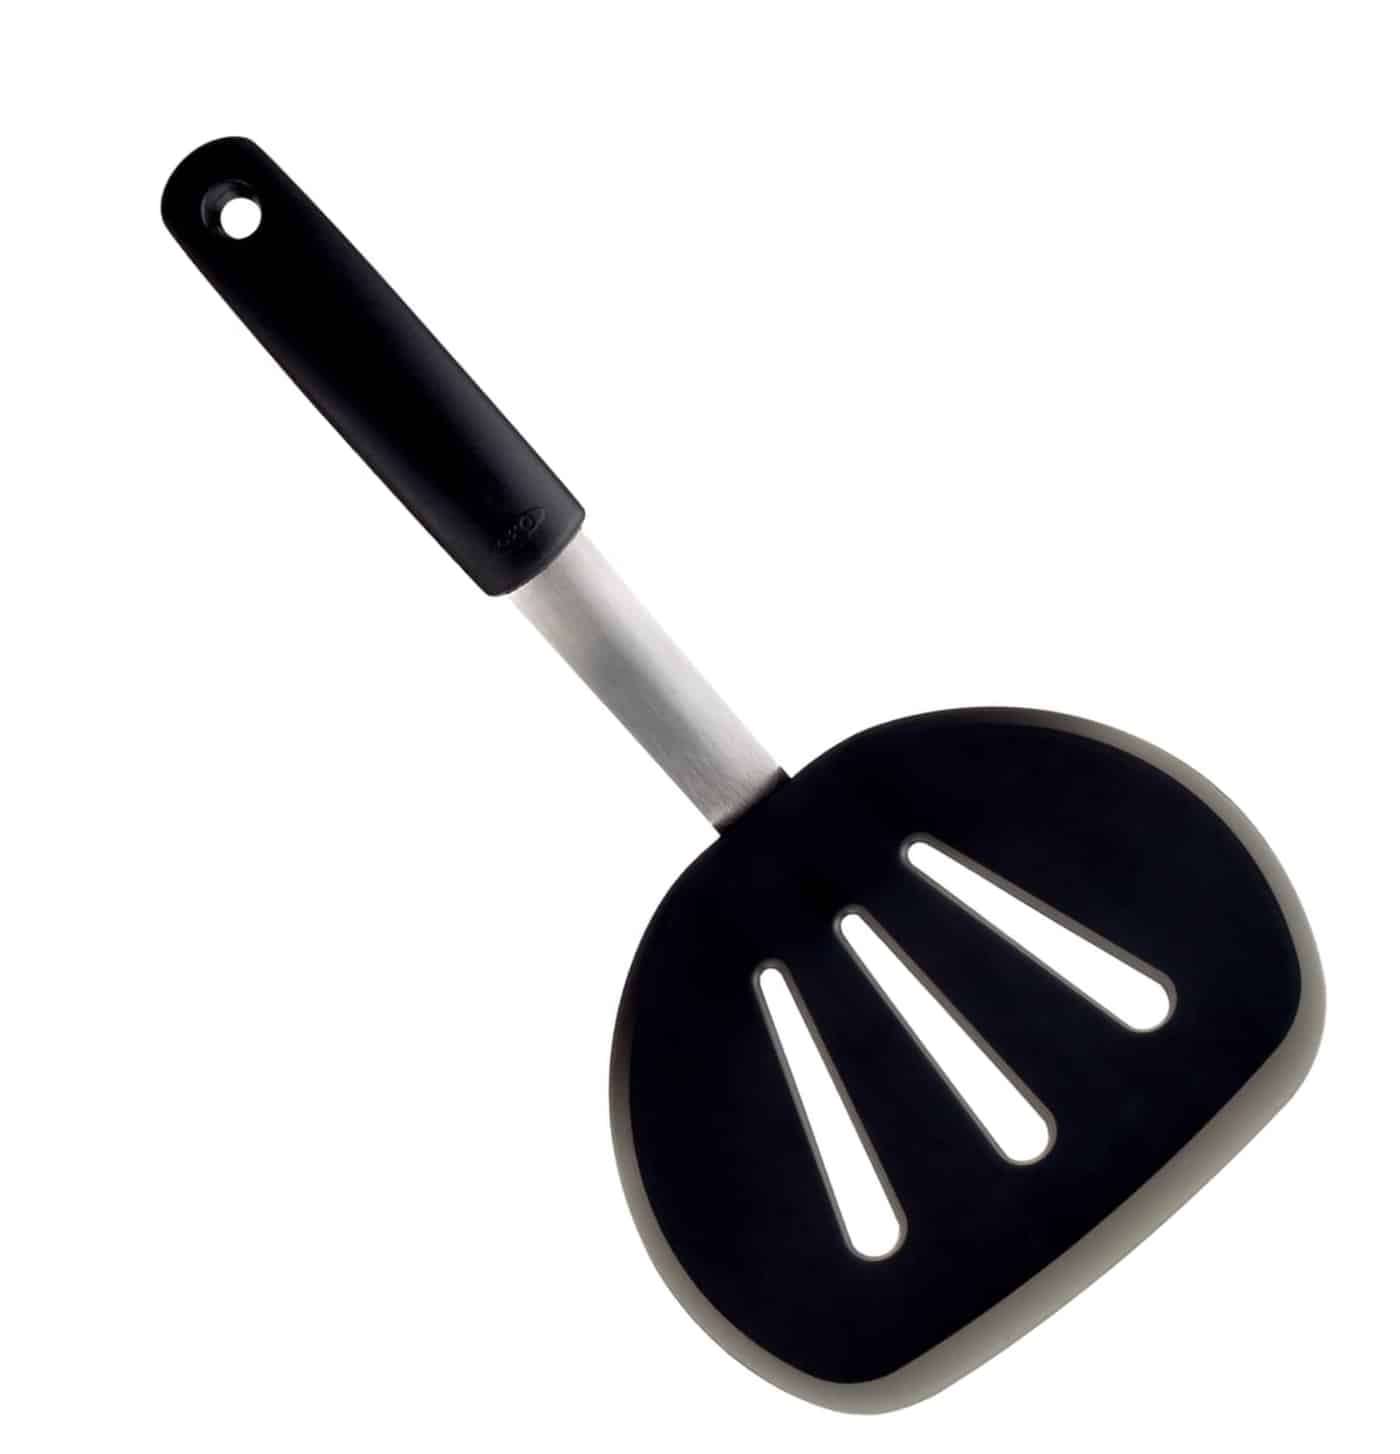 Best spatula for pancakes overall- OXO Good Grips Pancake Turner